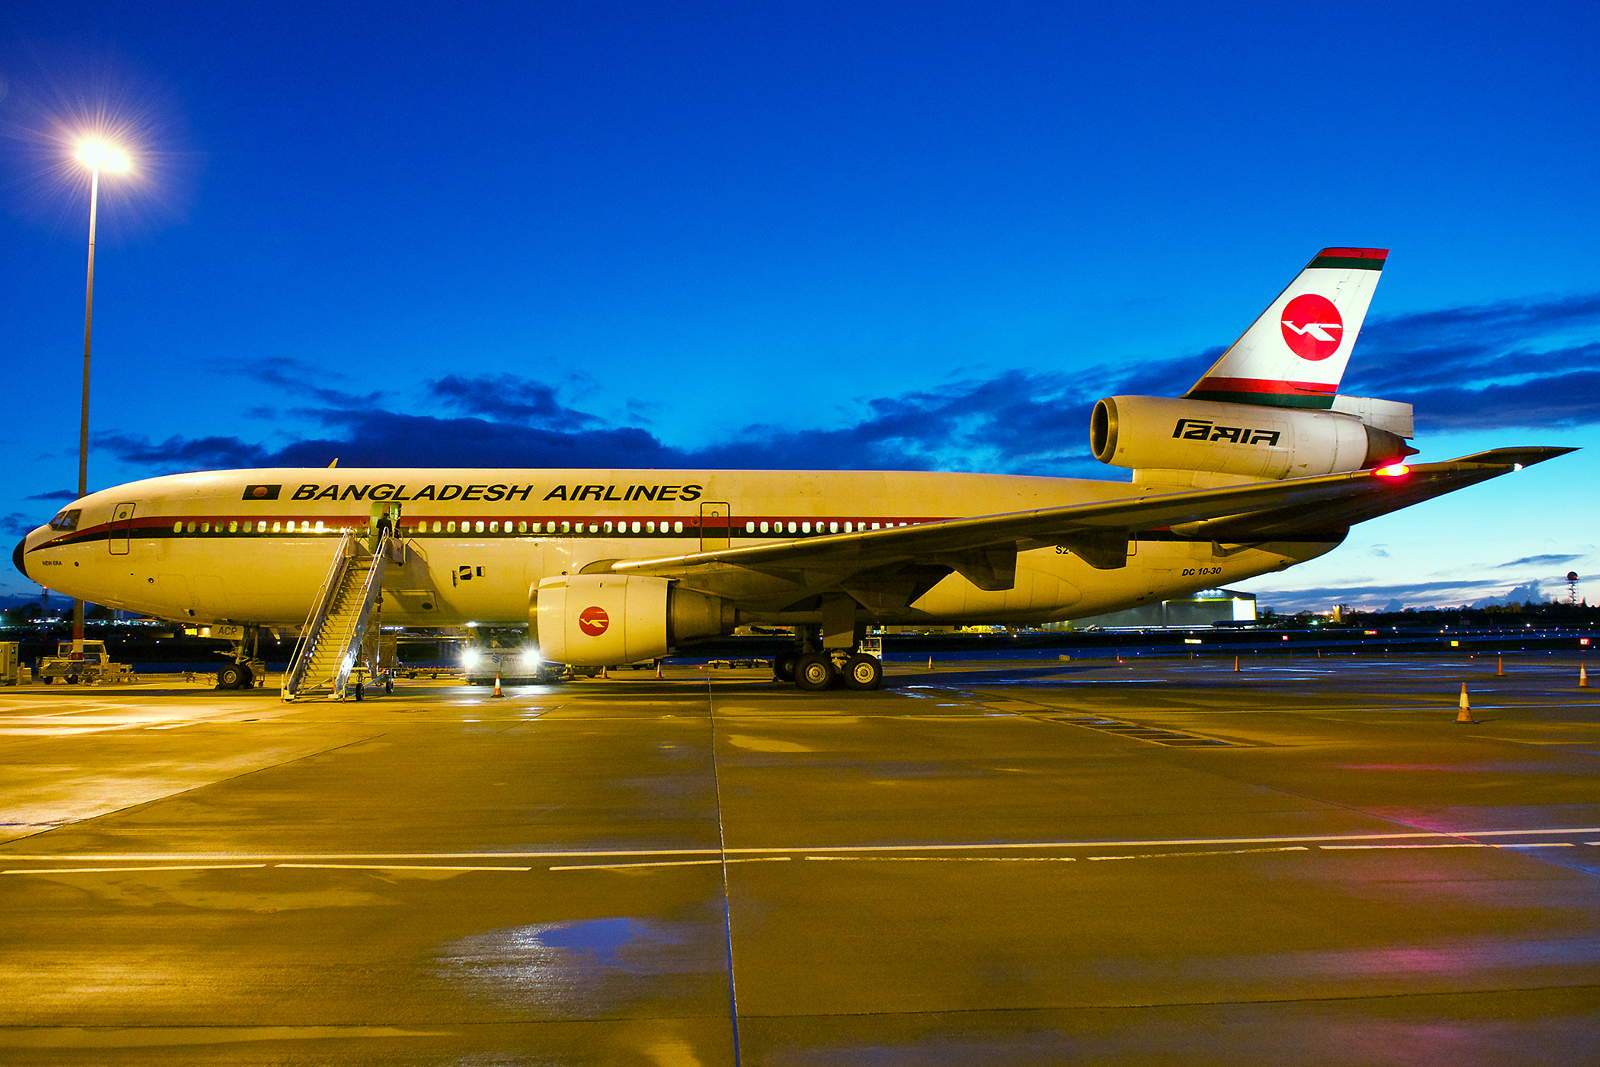 End of the line for the McDonnell Douglas DC-10